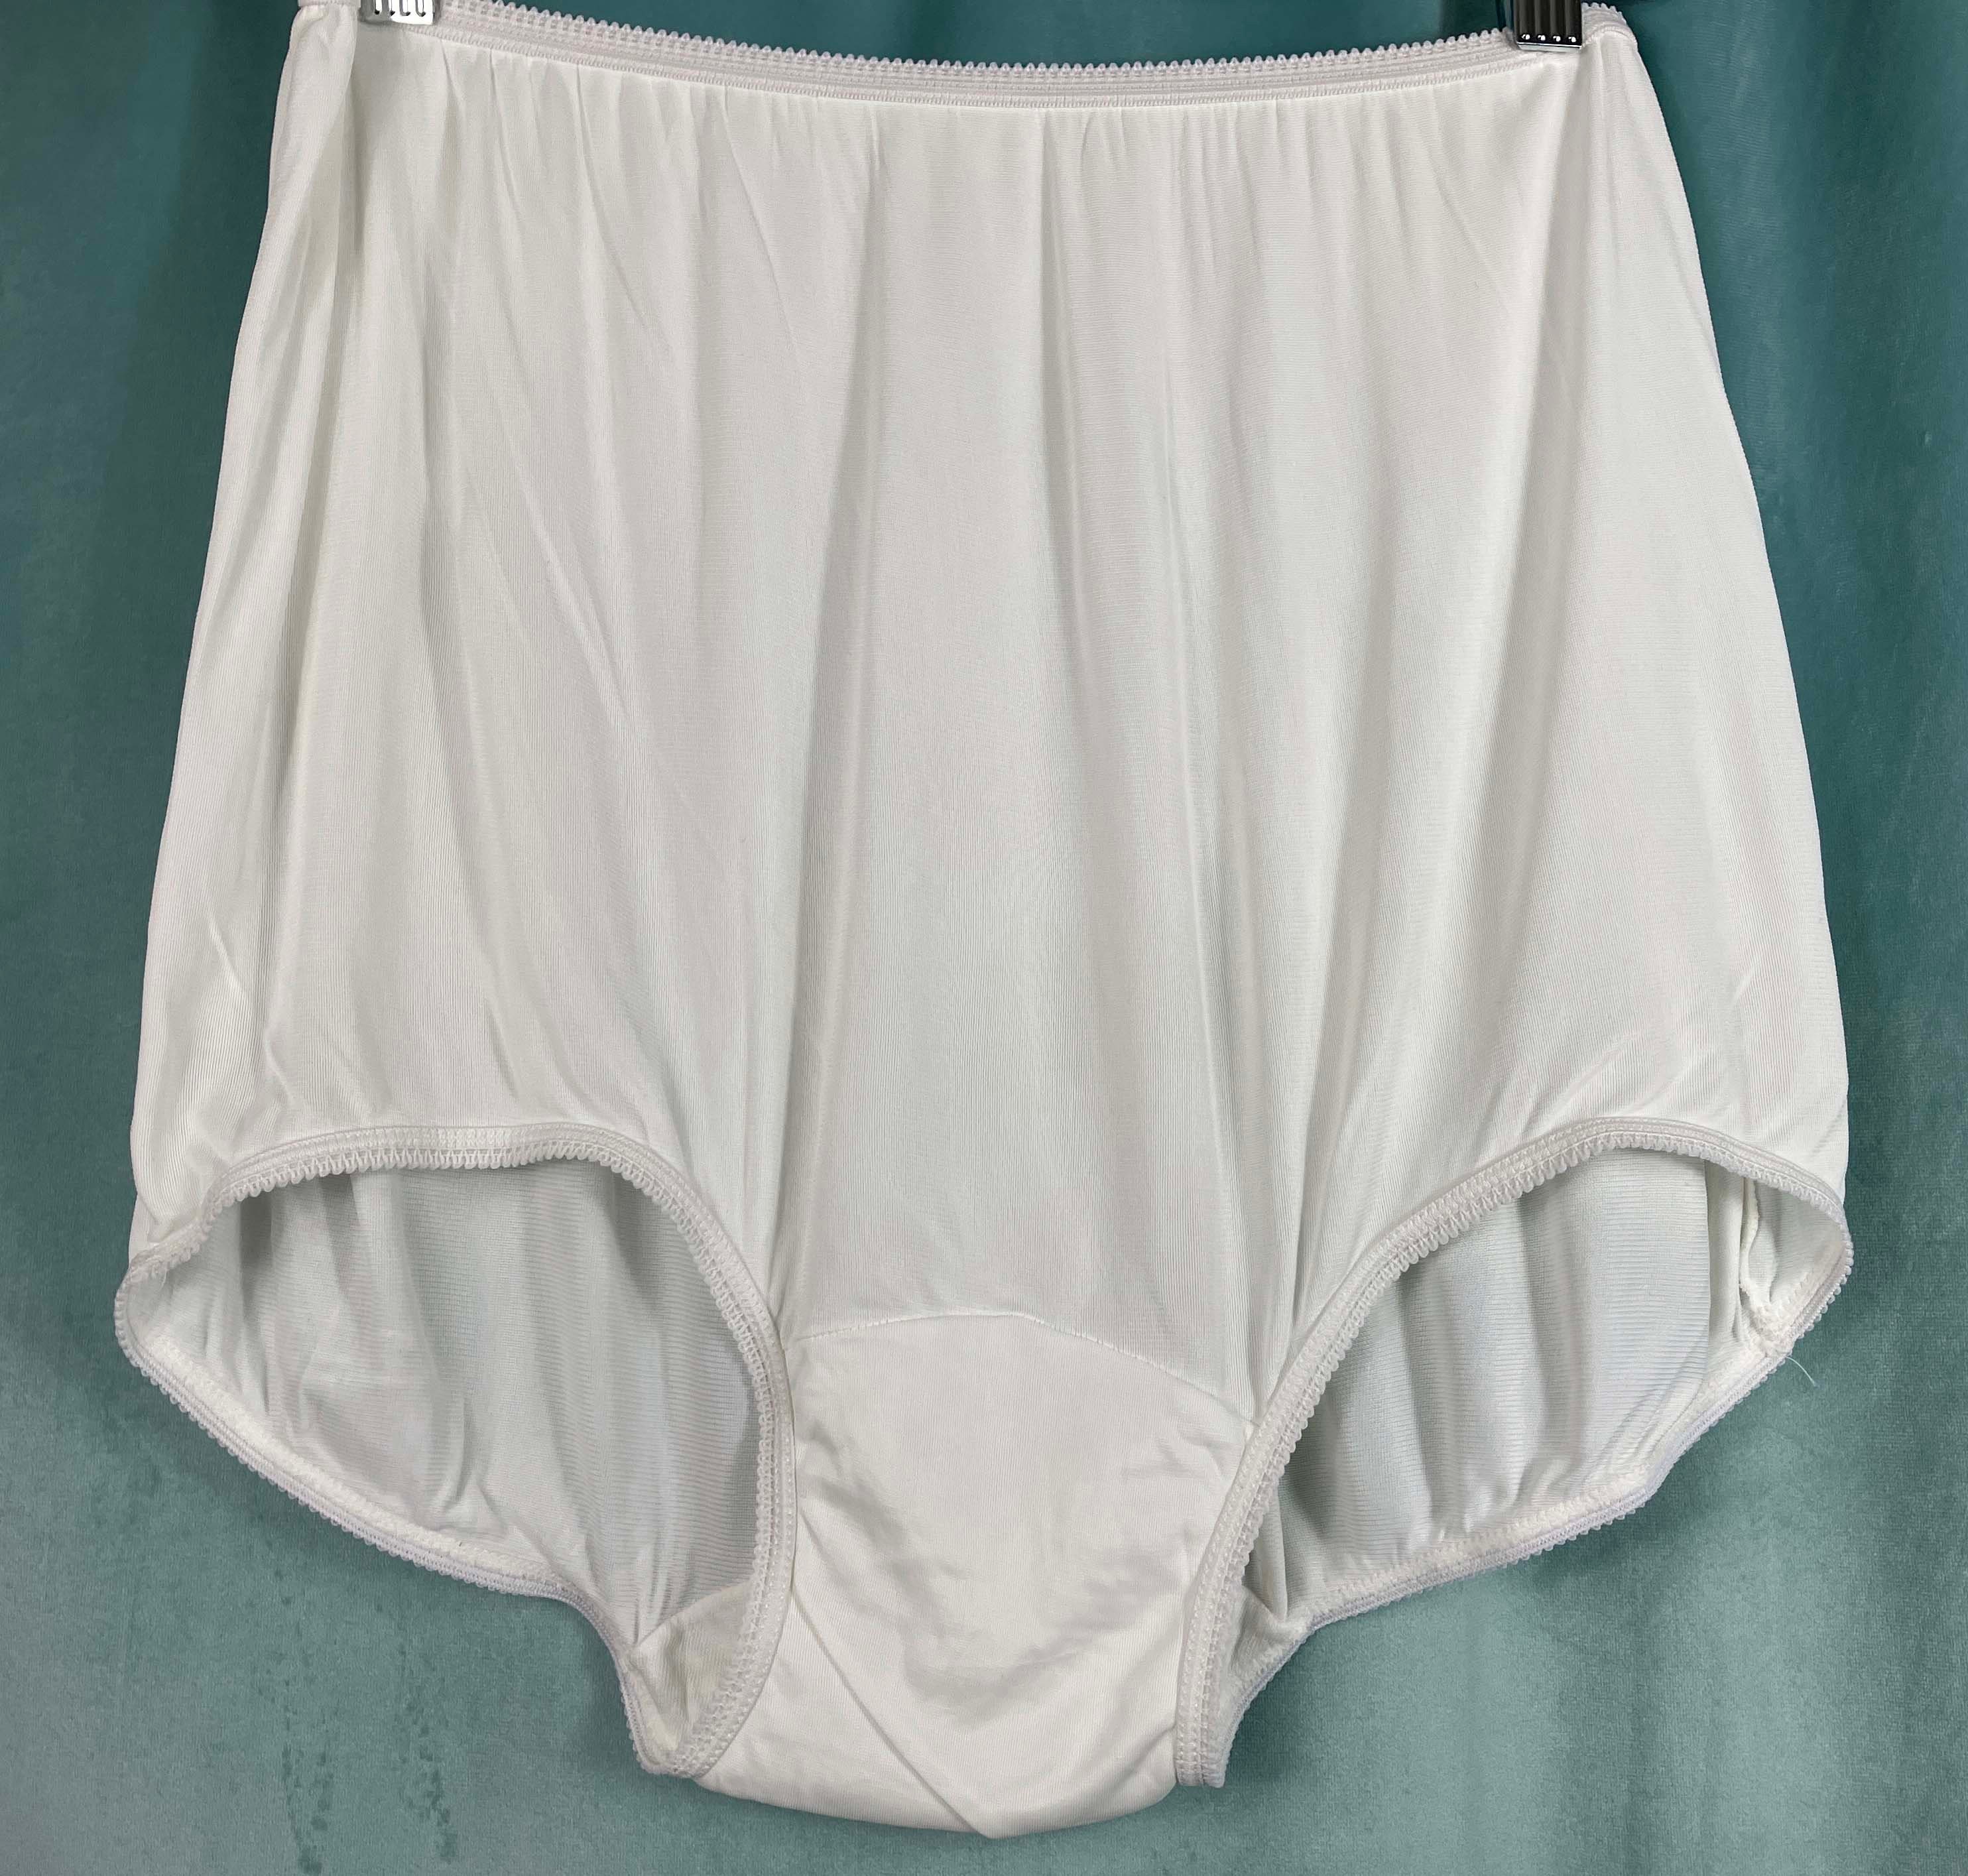 Vintage Hanes Her Way Full Brief Nylon Panty With Lace Waist Band  Candleglow Ivory Sz 6 medium 